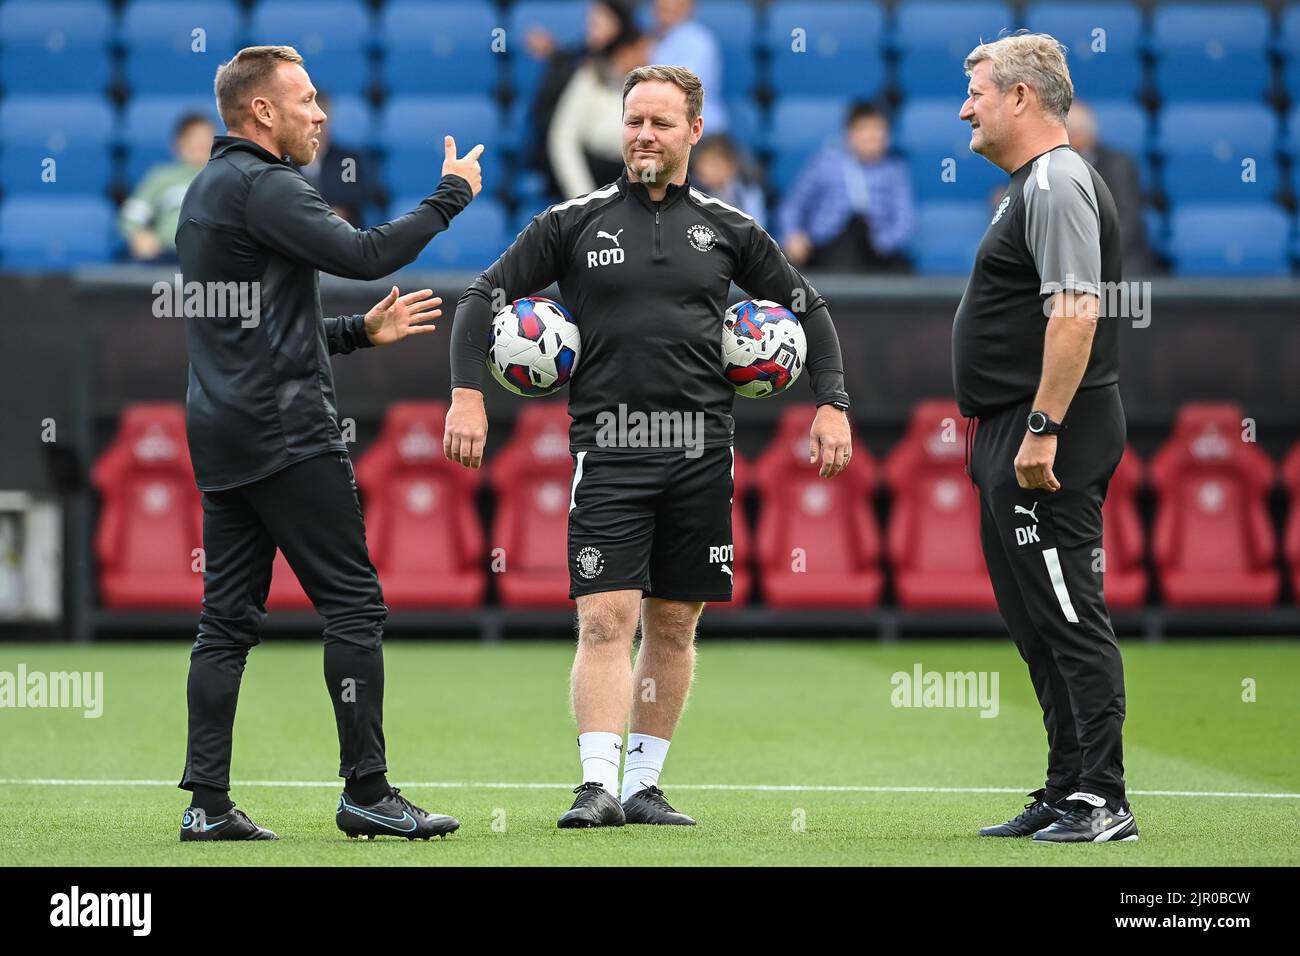 Craig Bellamy Assistant Manager of Burnley chats with David Kerslake and Richard O'Donnell Assistant Head Coach of Blackpool during the pre-game warmup in, on 8/20/2022. (Photo by Craig Thomas/News Images/Sipa USA) Credit: Sipa USA/Alamy Live News Stock Photo